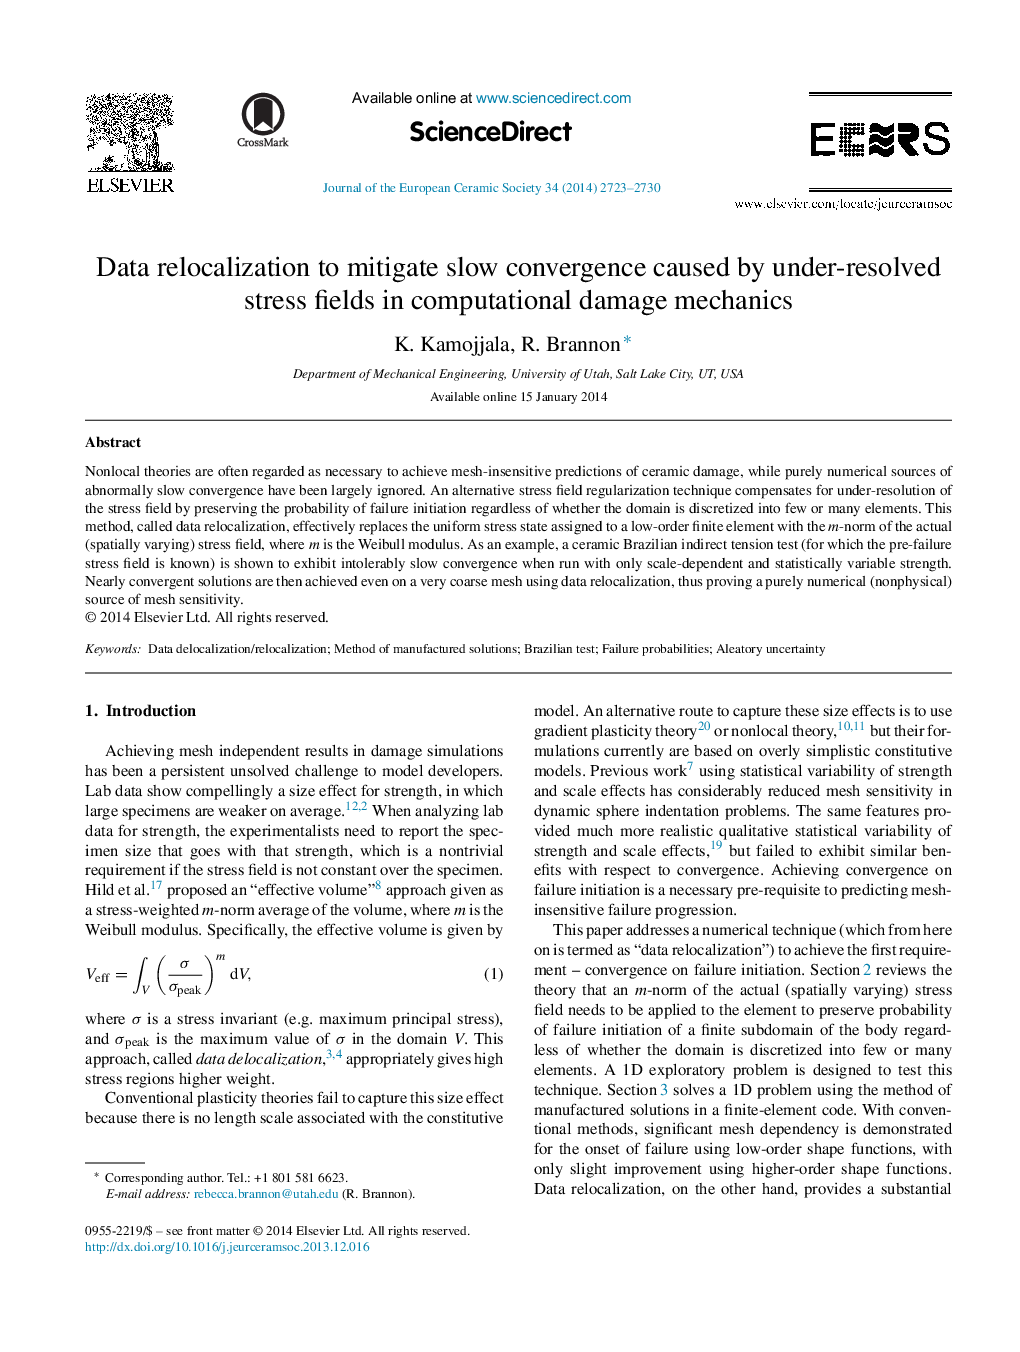 Data relocalization to mitigate slow convergence caused by under-resolved stress fields in computational damage mechanics